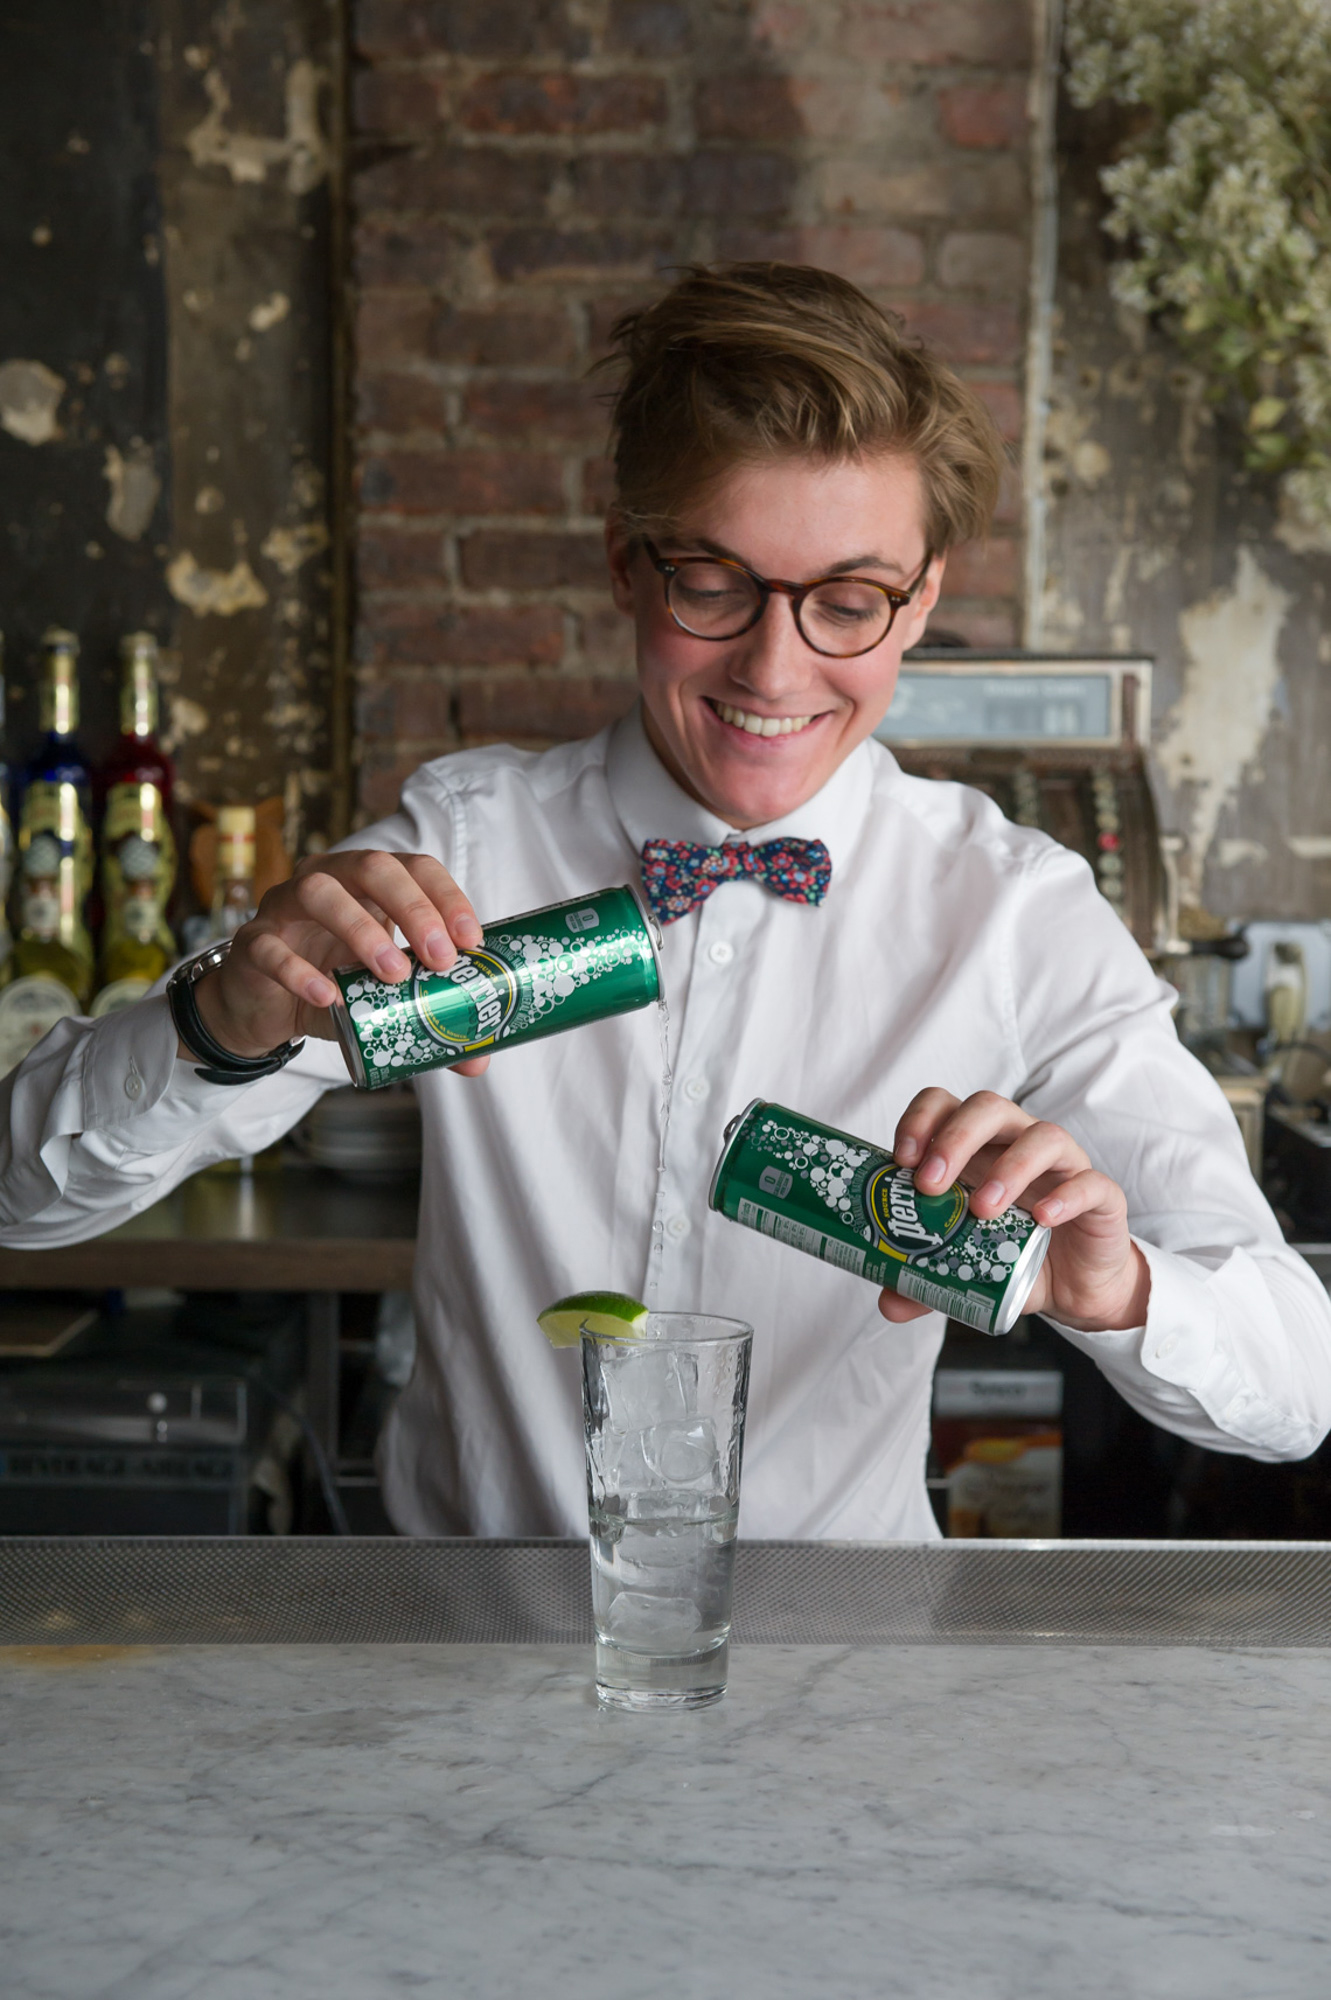 Photo by Morgan Ione Yeager, NYC Food photographer, Perrier USA, Sel Rrose, Oysters, sparkling mineral water, New York City, cocktail